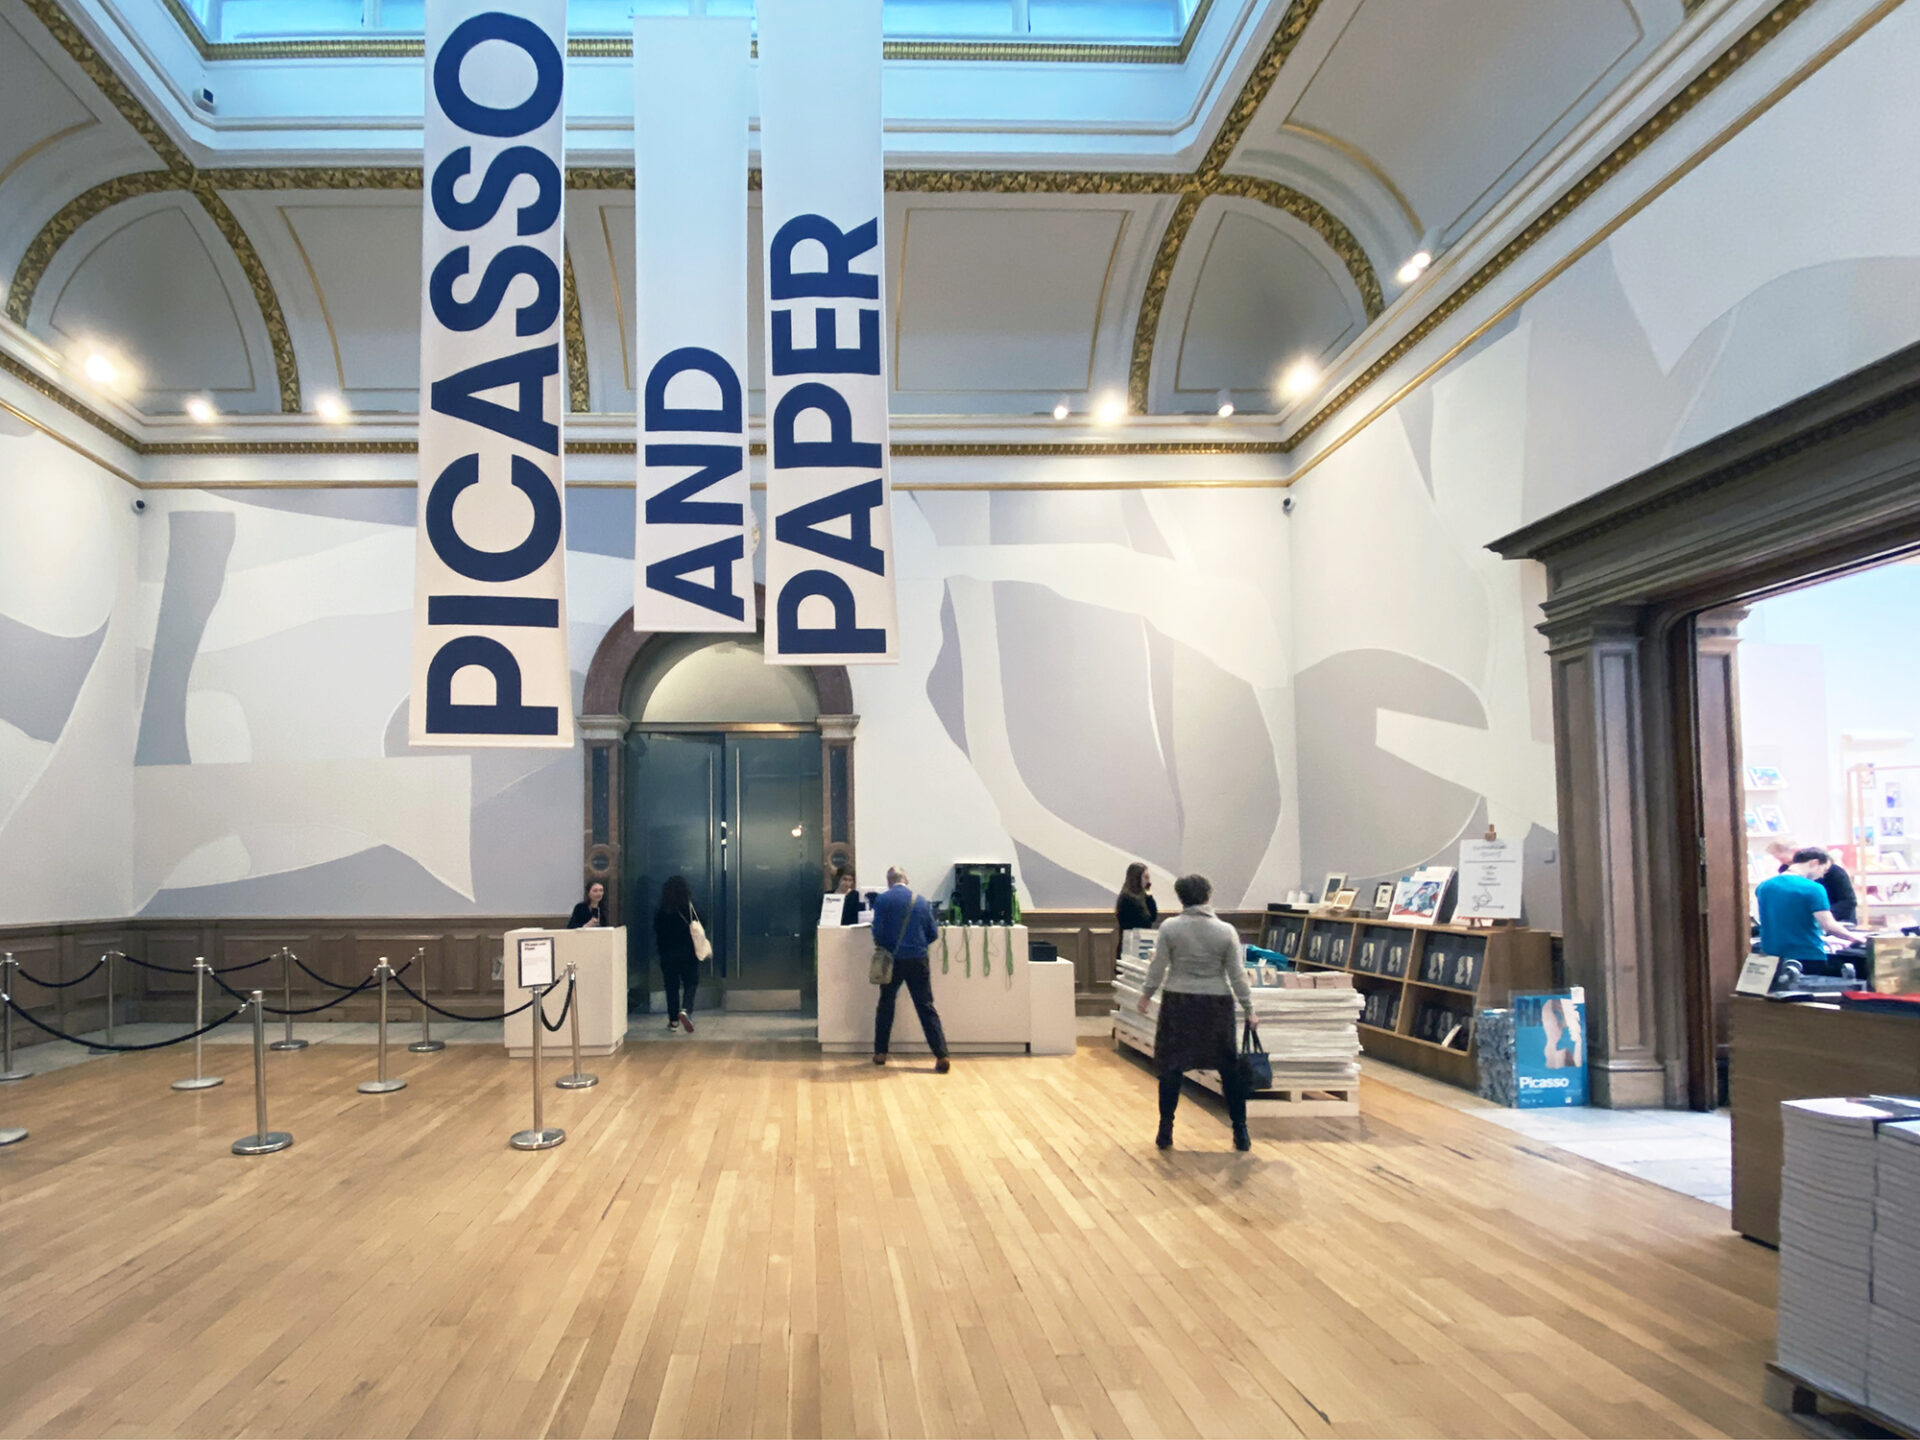 Picasso Royal Academy of Arts printed and installed wall graphics